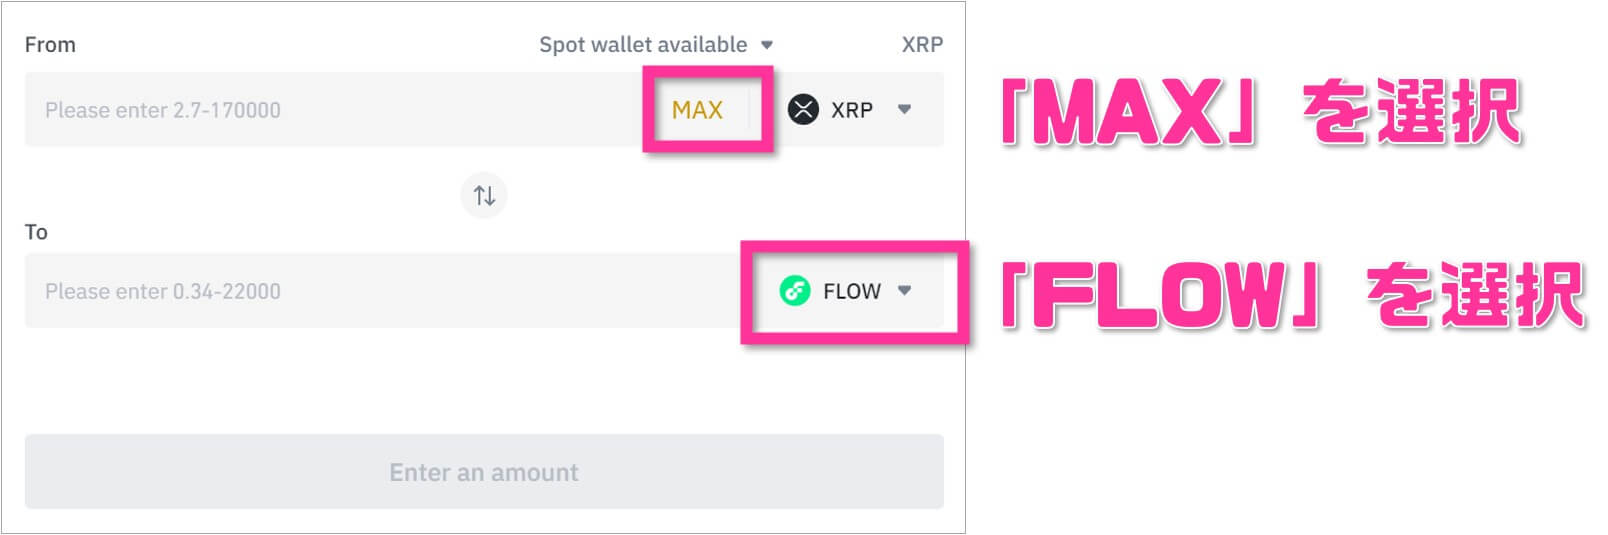 XRPをFLOWにスワップ